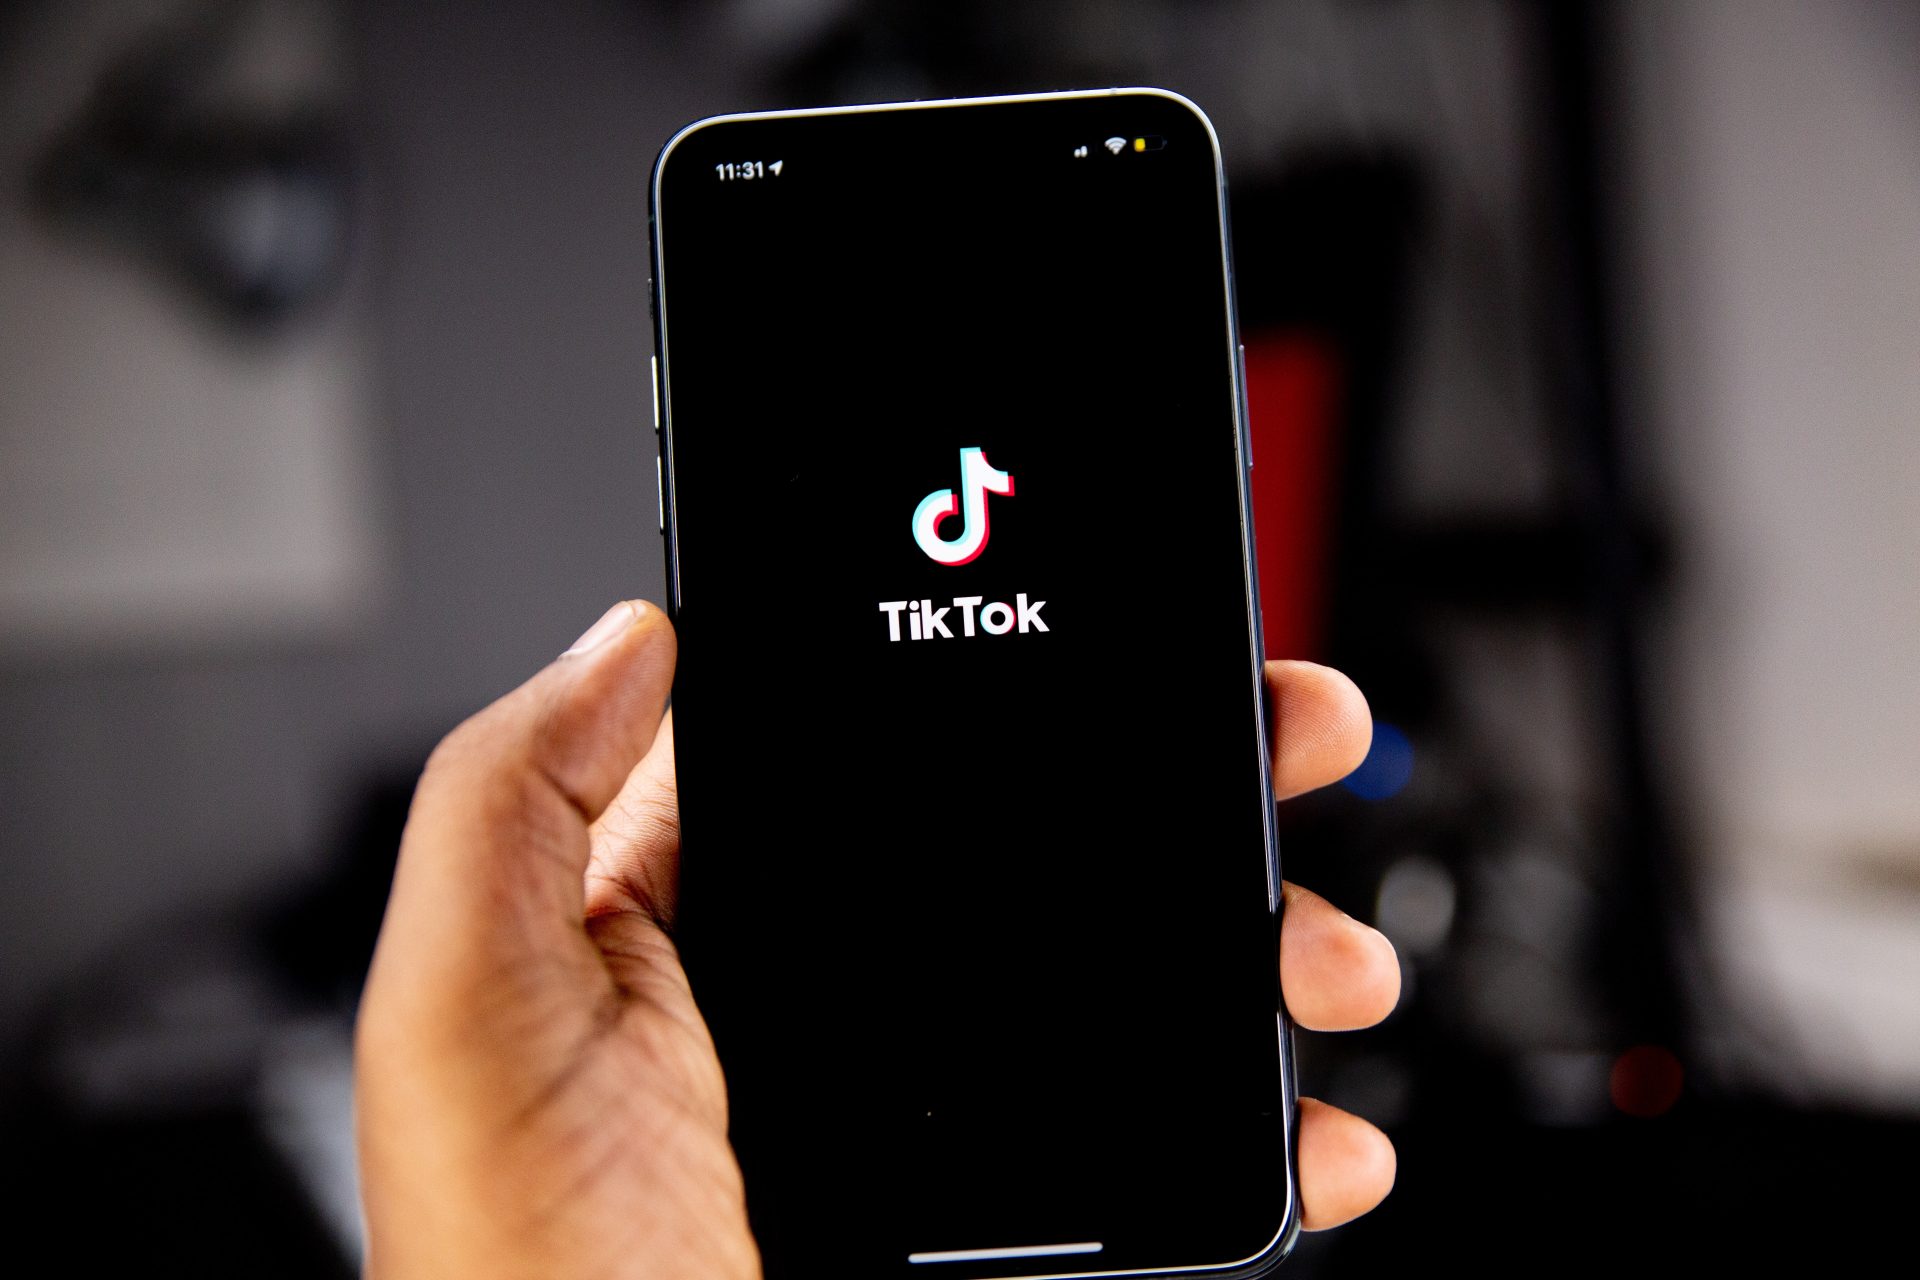 TikTok - The Next Phase of Short-Form Content